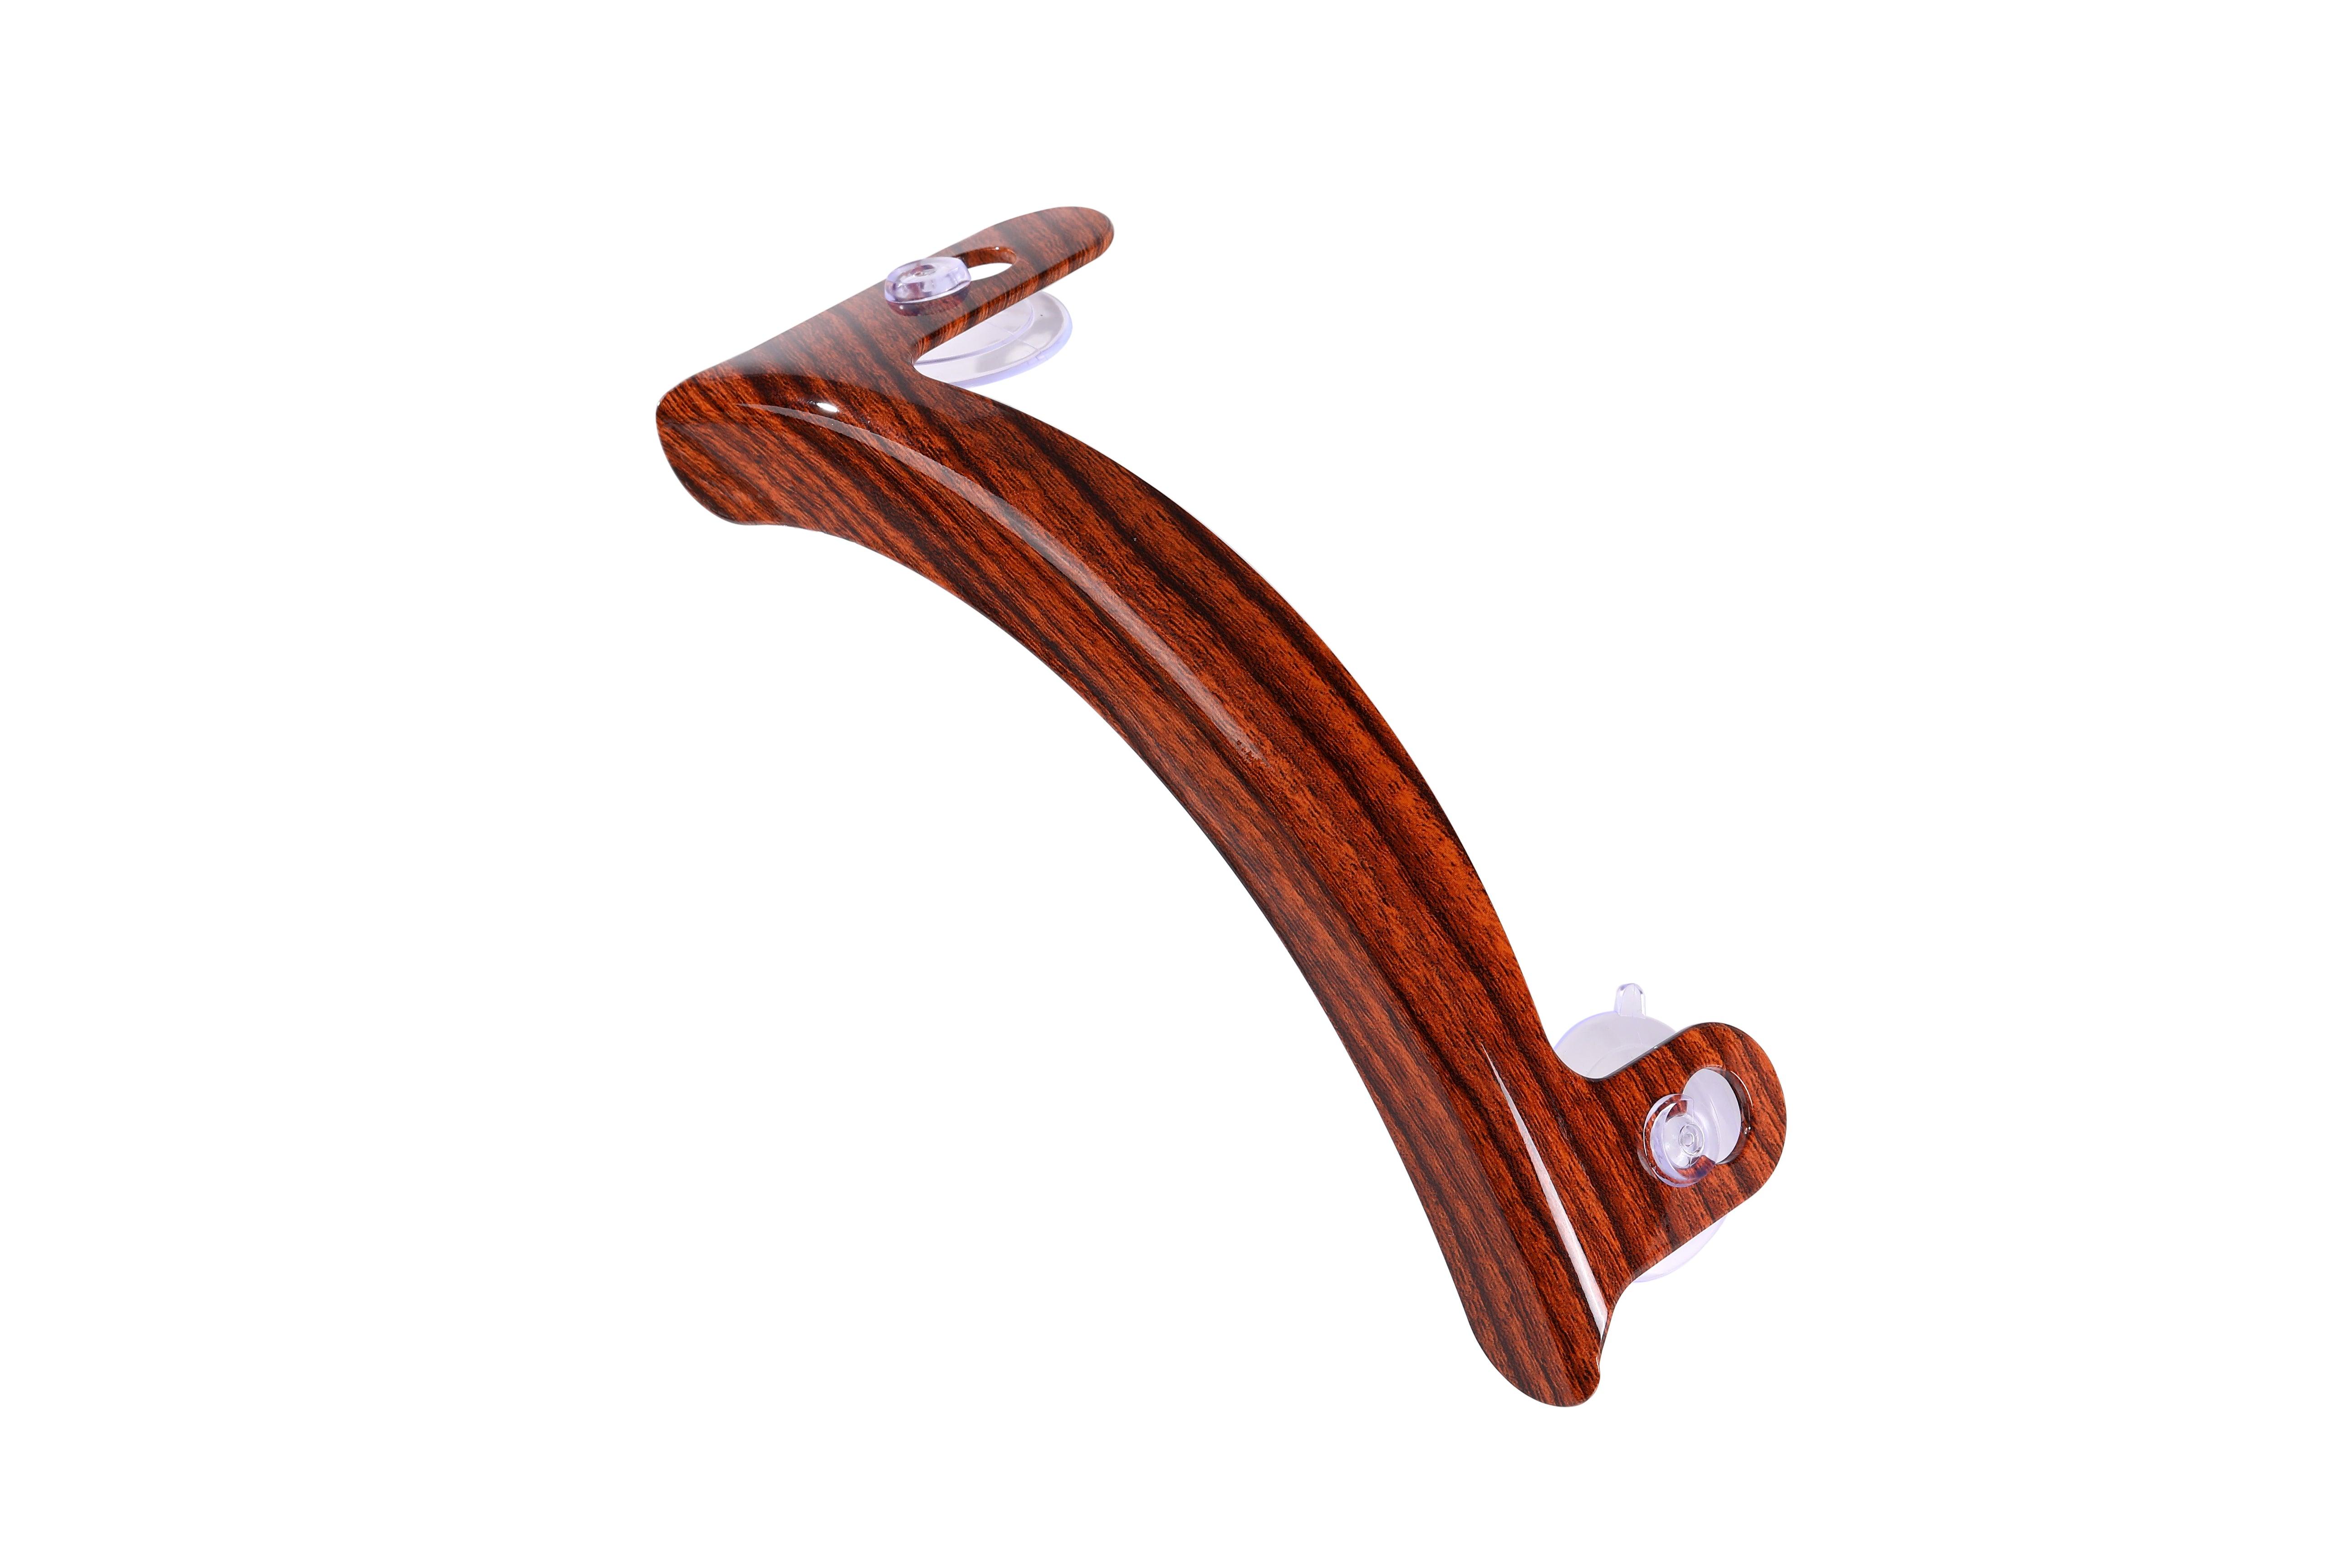 Alba Guitar Beads 6 Stage Foot Rest, Foot Stool for Classical guitar and  for Flamenco guitar.